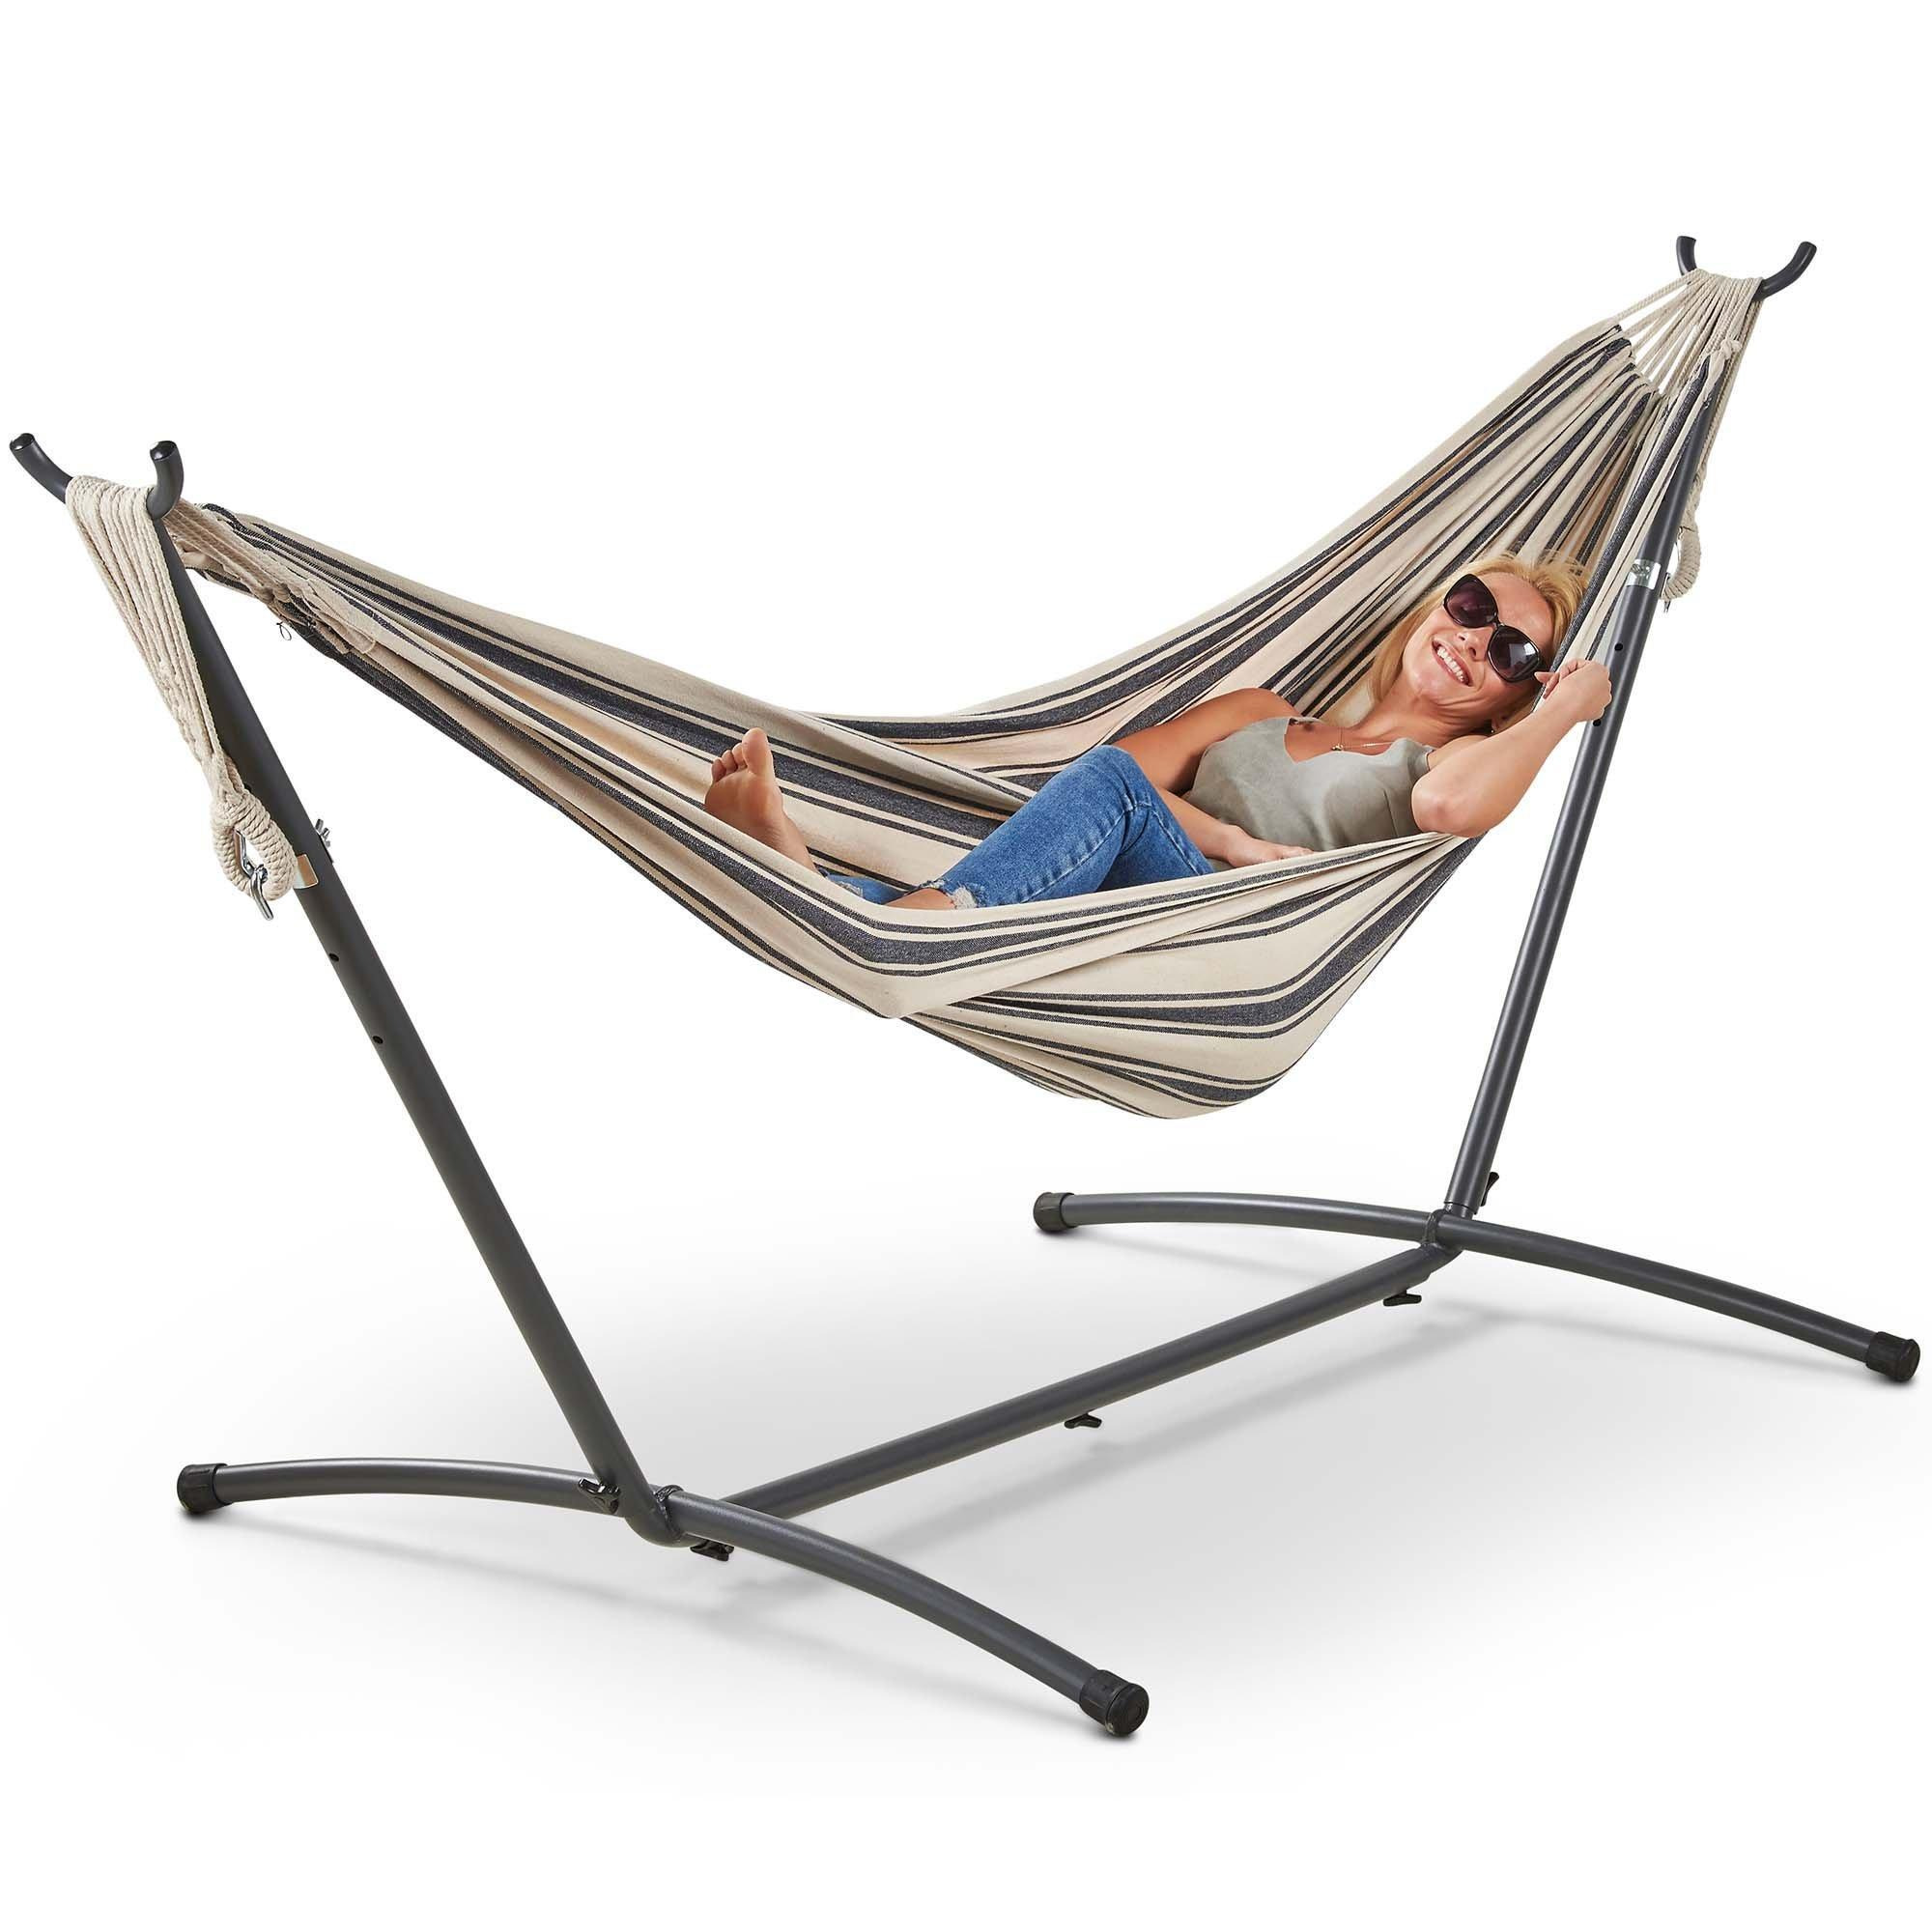 Outdoor Stripe Design 2 Person Hammock with Frame - image 1